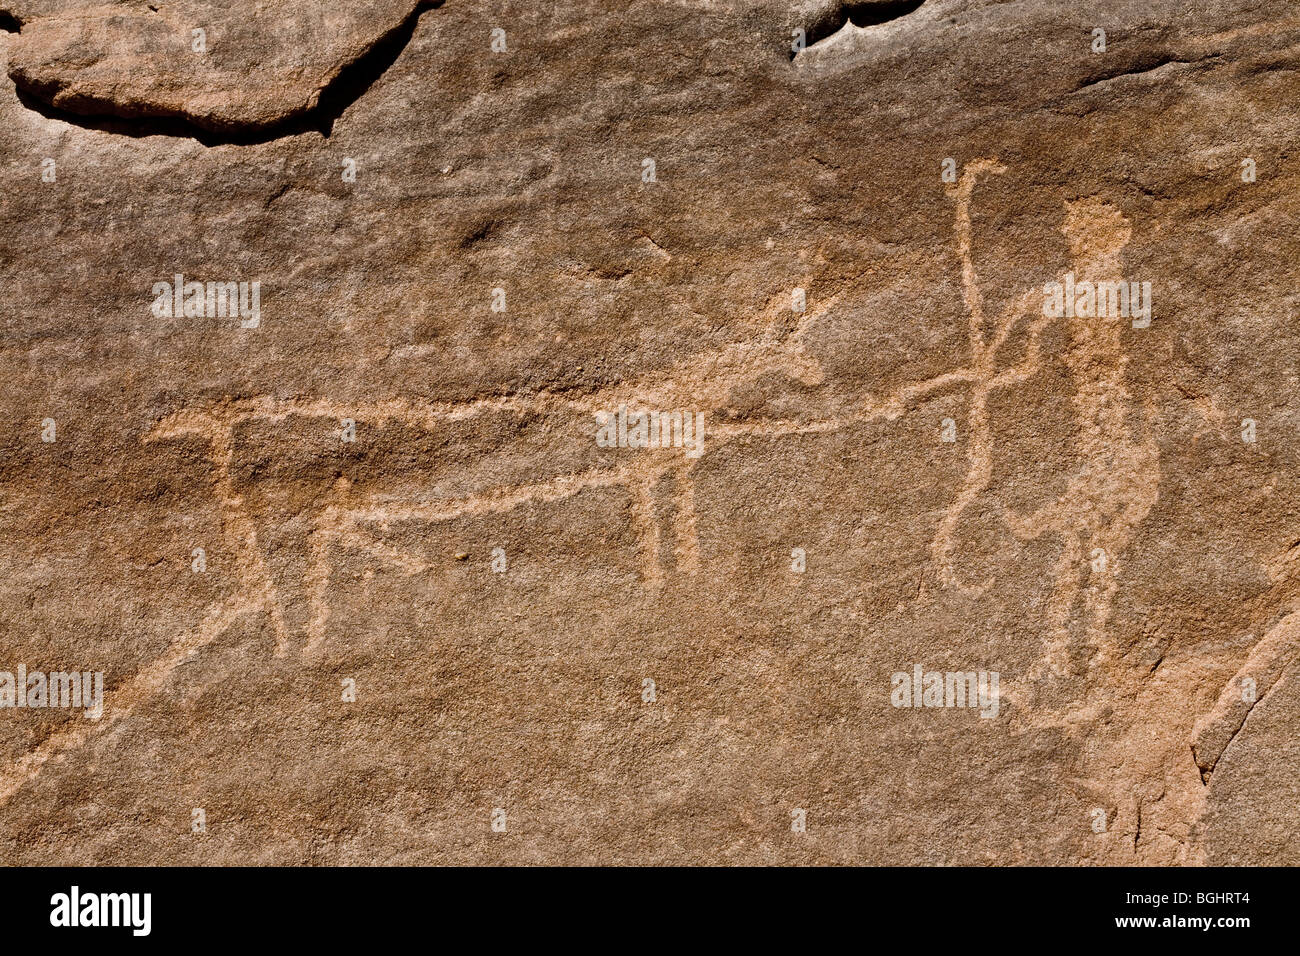 Close up of man with bow  tethering cow at Winklers famous Rock-Art site 26 in Wadi Abu Wasil in the Eastern Desert of Egypt. Stock Photo